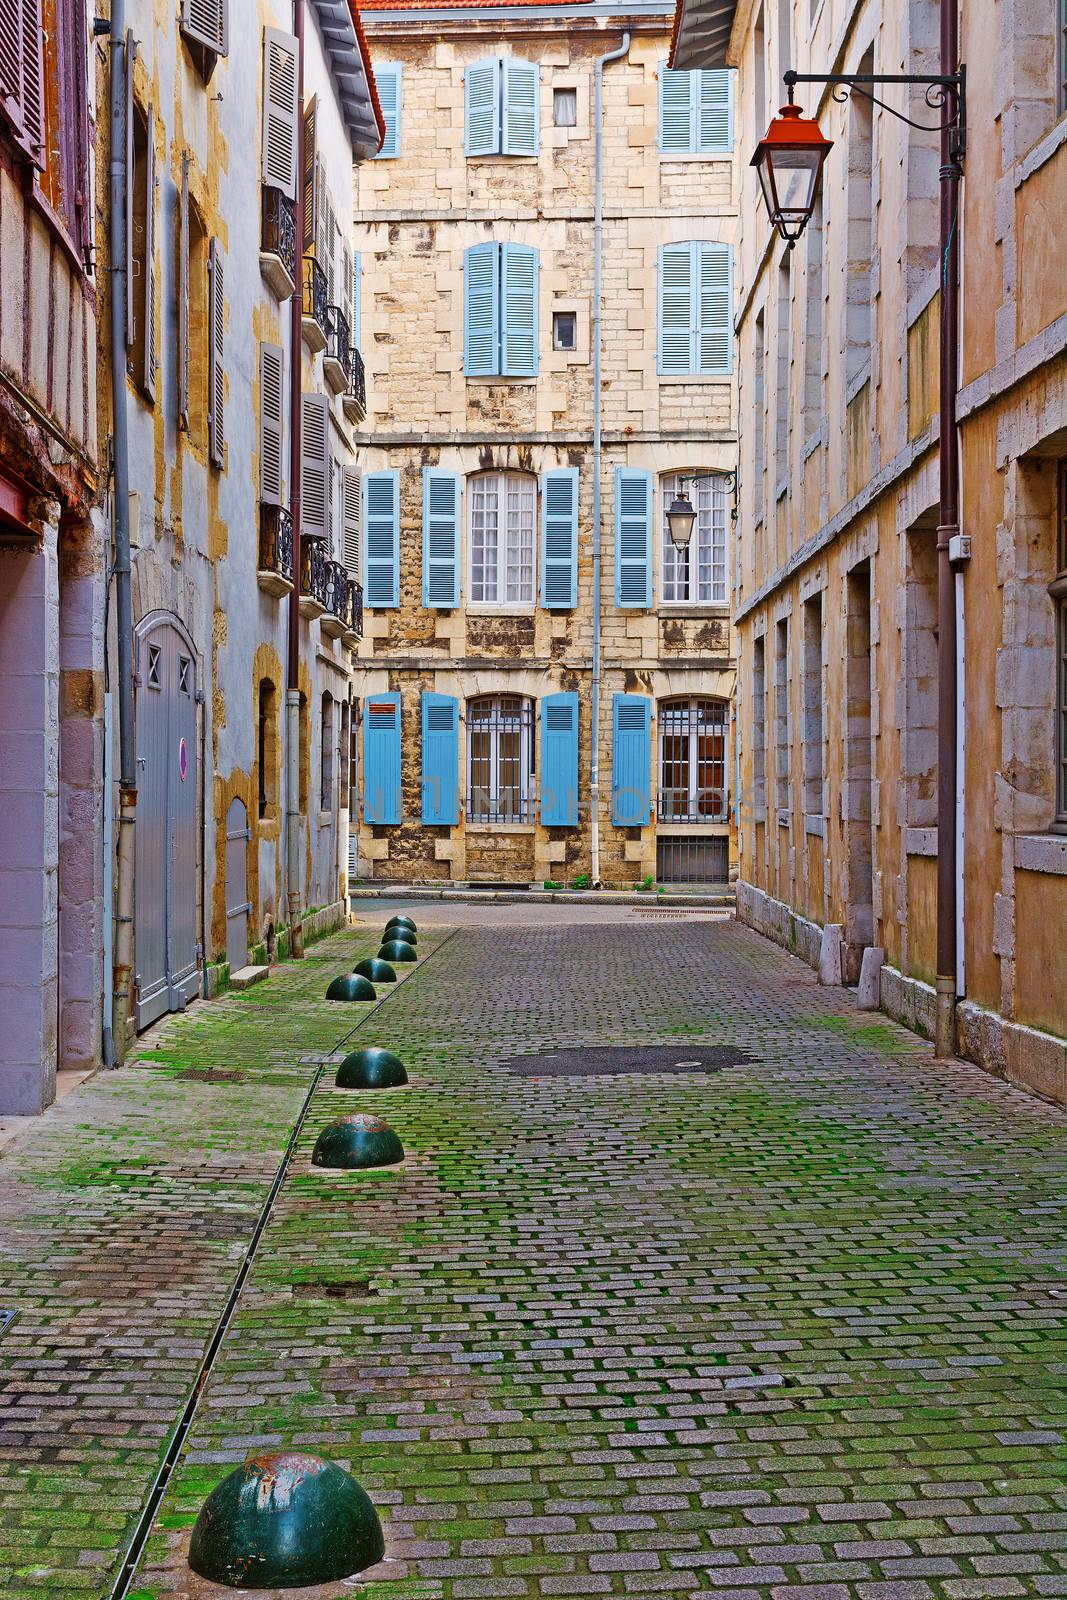 Deserted Street of the French City of Biarrits